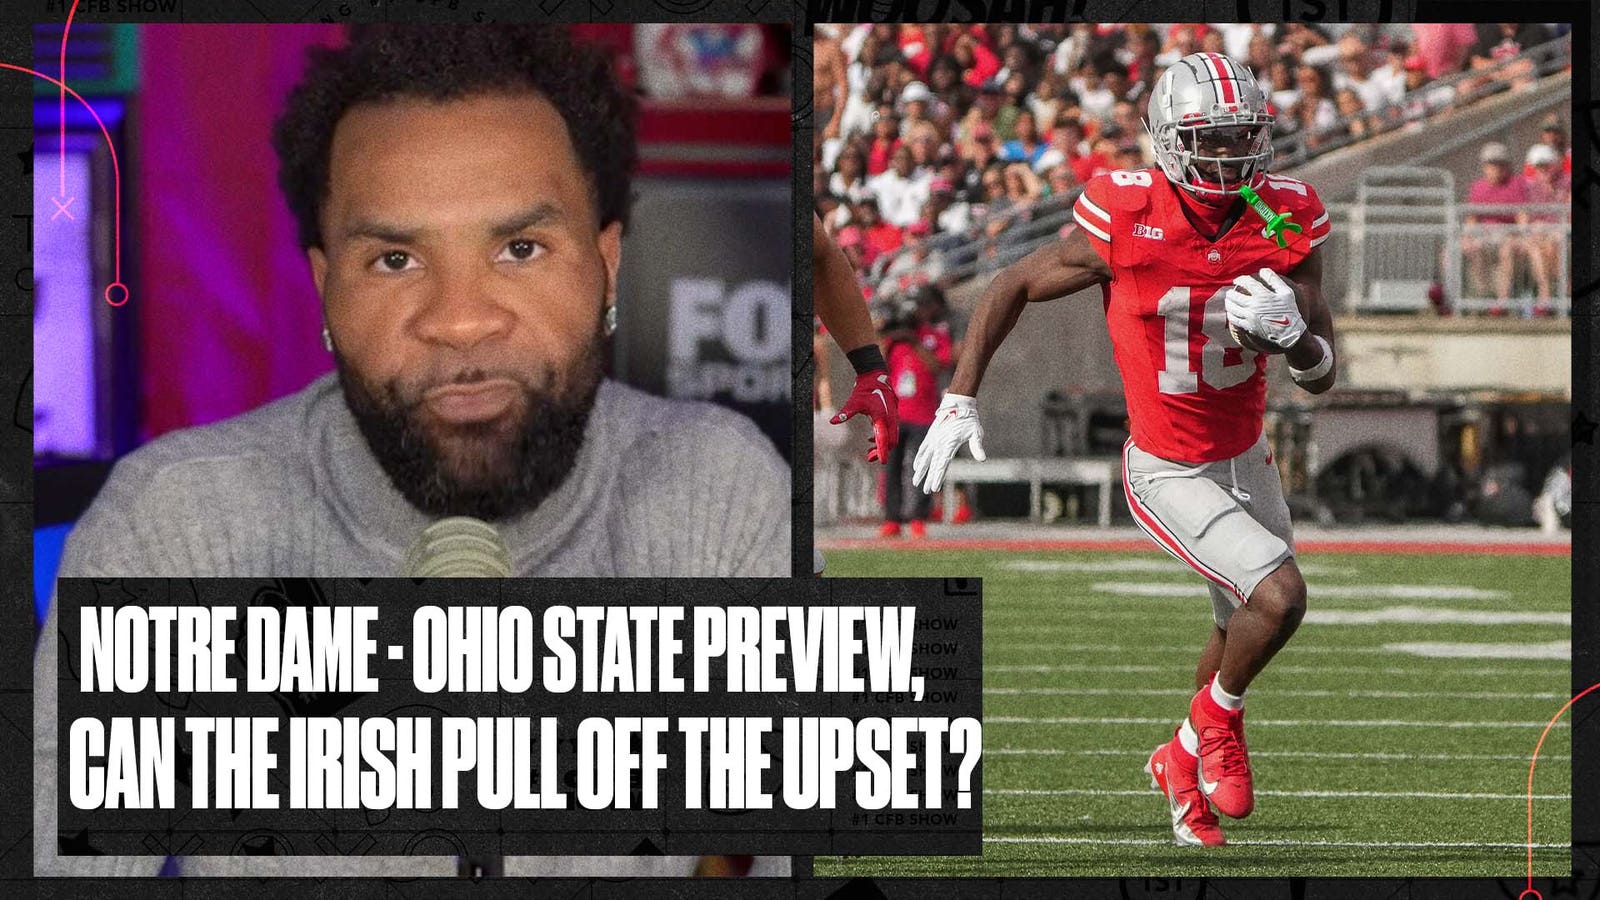 Notre Dame vs. Ohio State preview: Can the Irish pull off the upset?